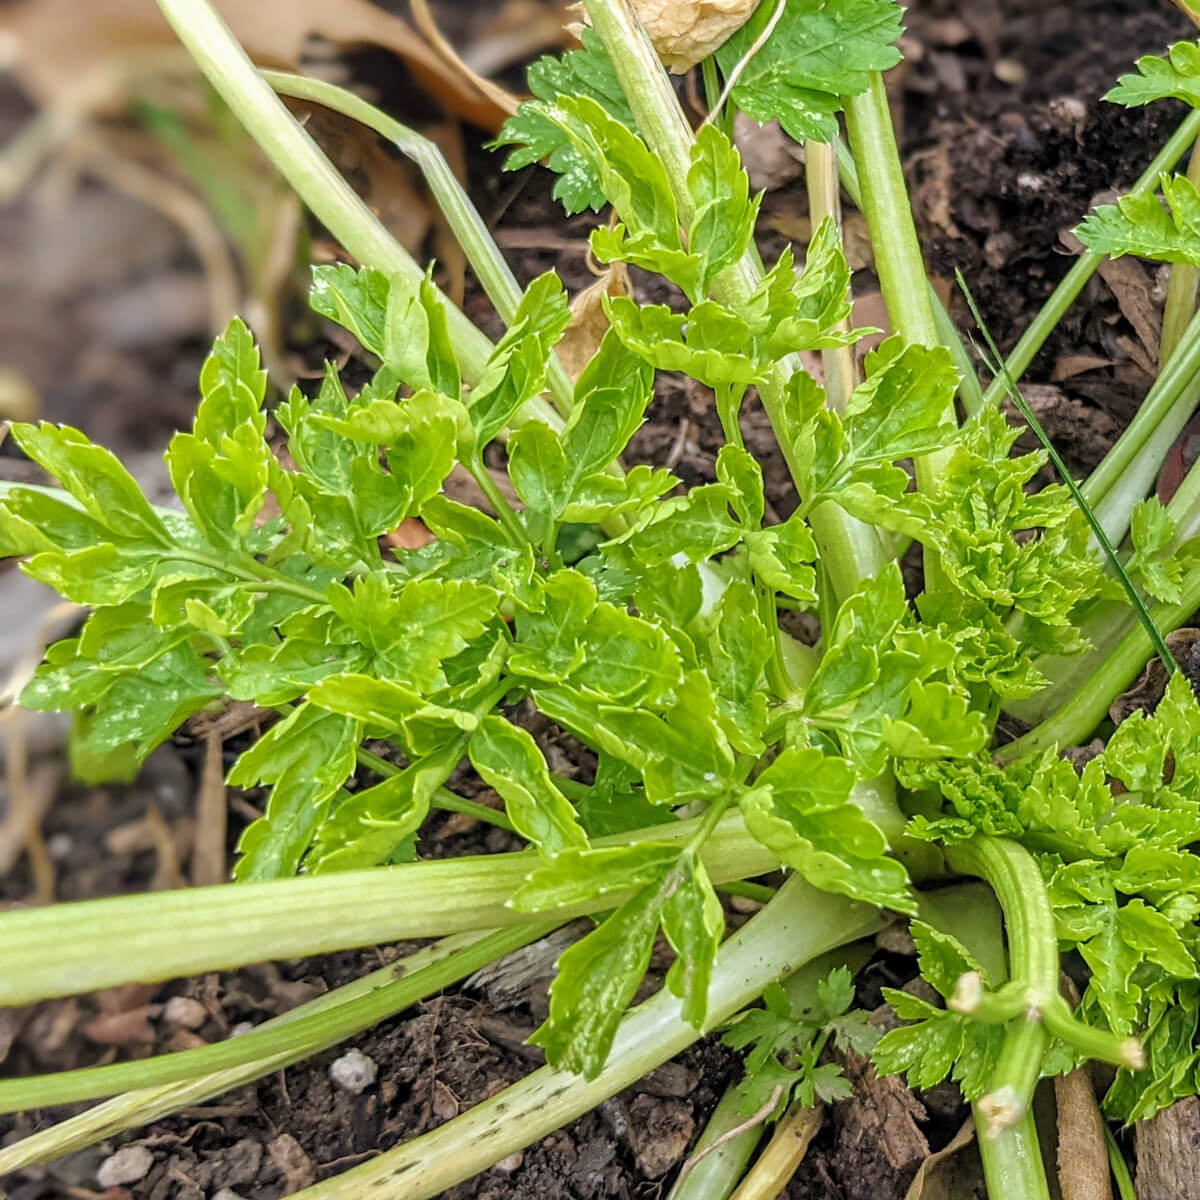 How to harvest parsley so it keeps growing - here you can see more new parsley leaves growing from the center.